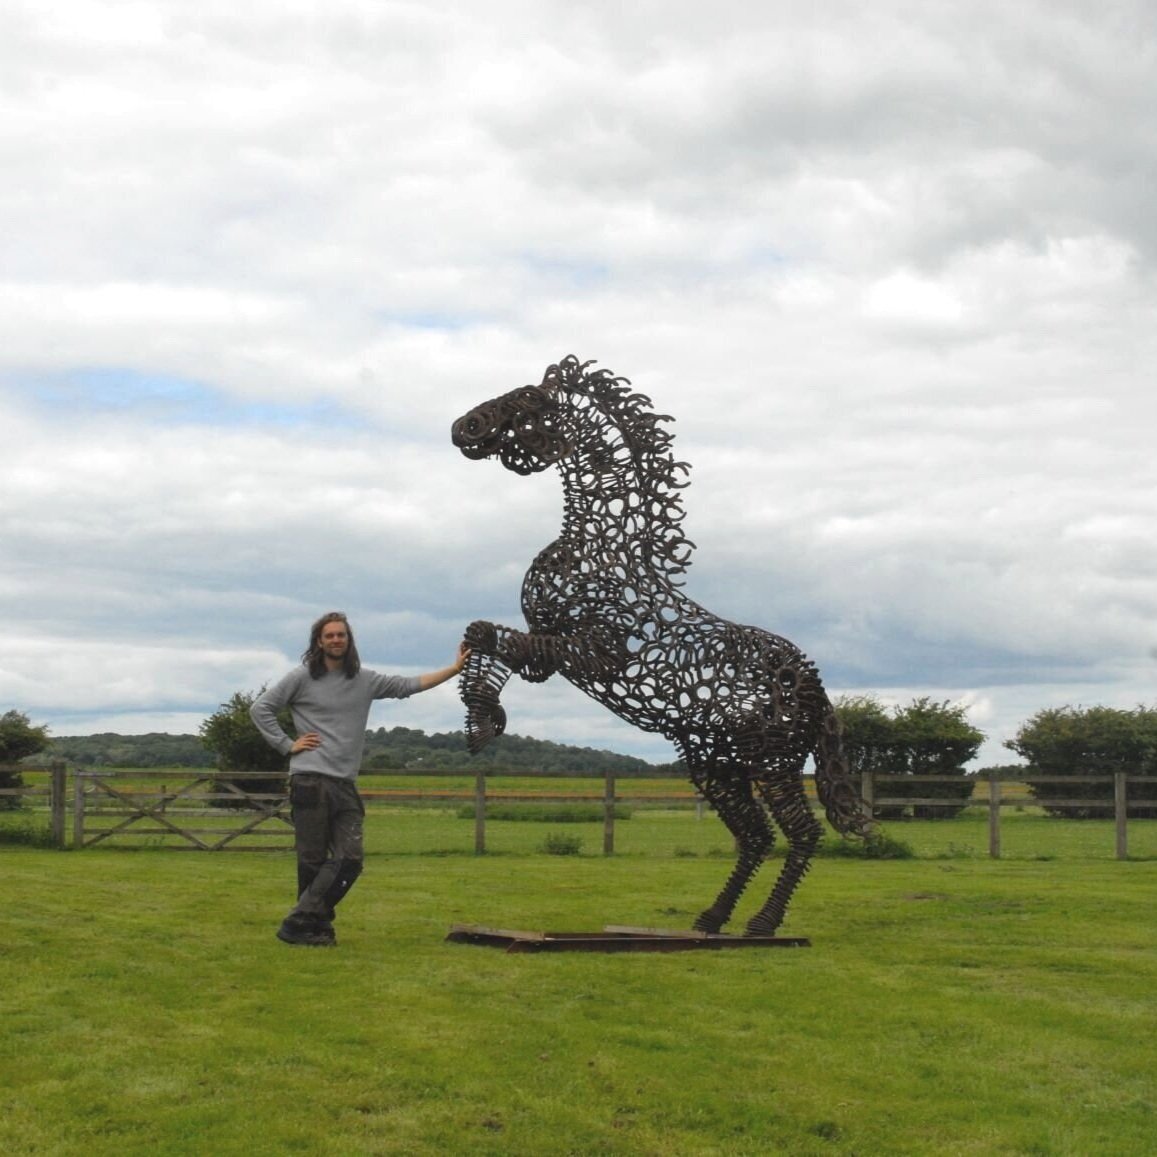 Full scale Rearing horse Sculpture made from horseshoes